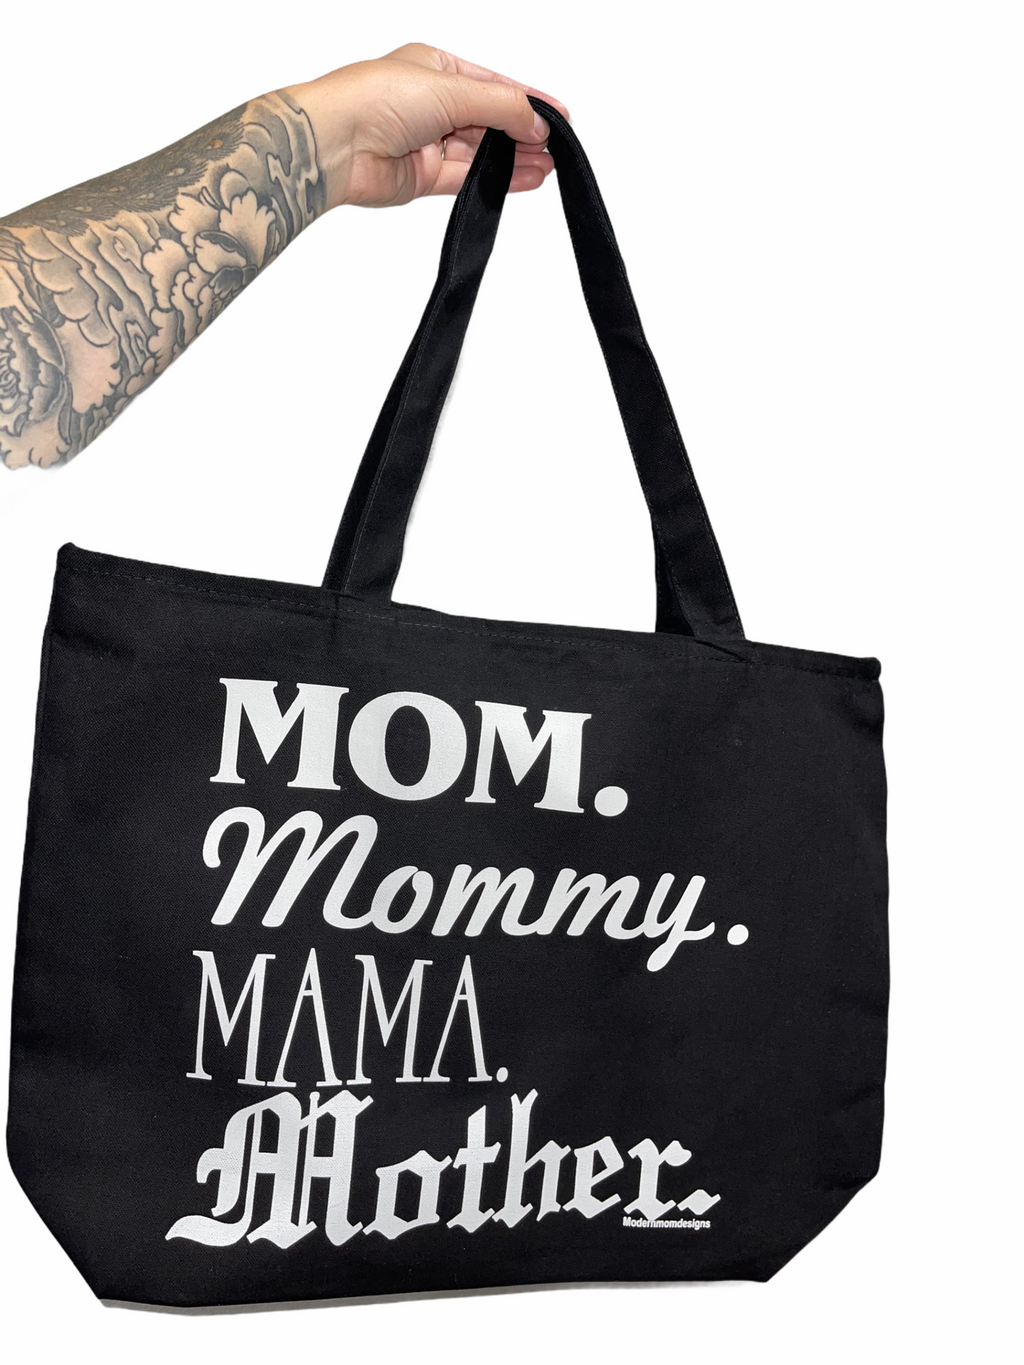 Mom. Mommy. Mama. Mother. 2.0 tote